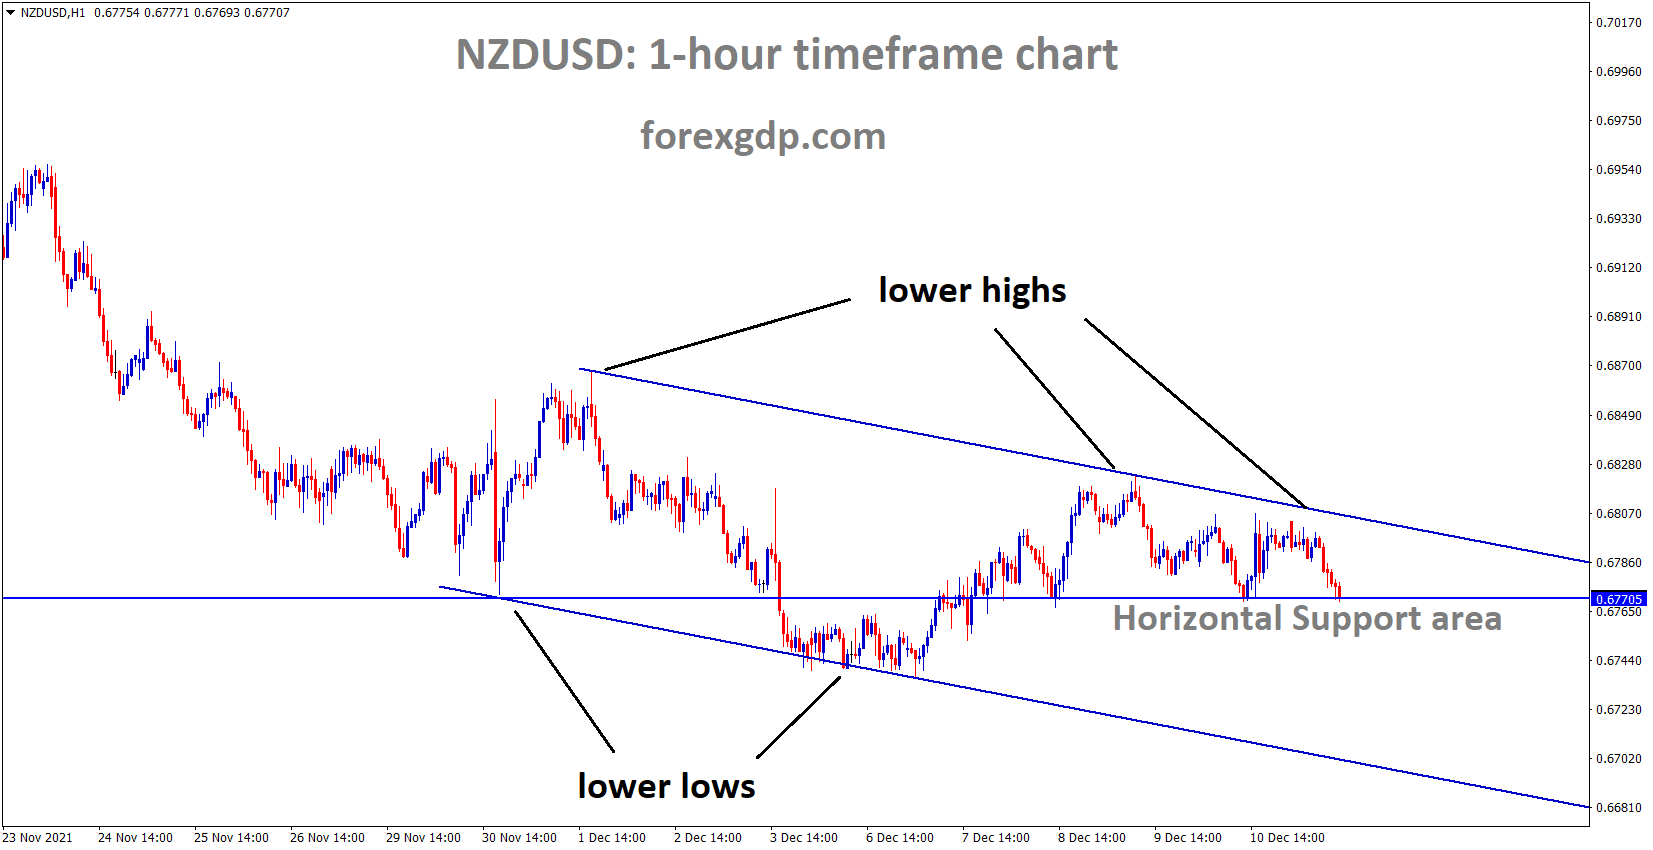 NZDUSD is moving in the Descending channel and the market has reached the Horizontal support area.